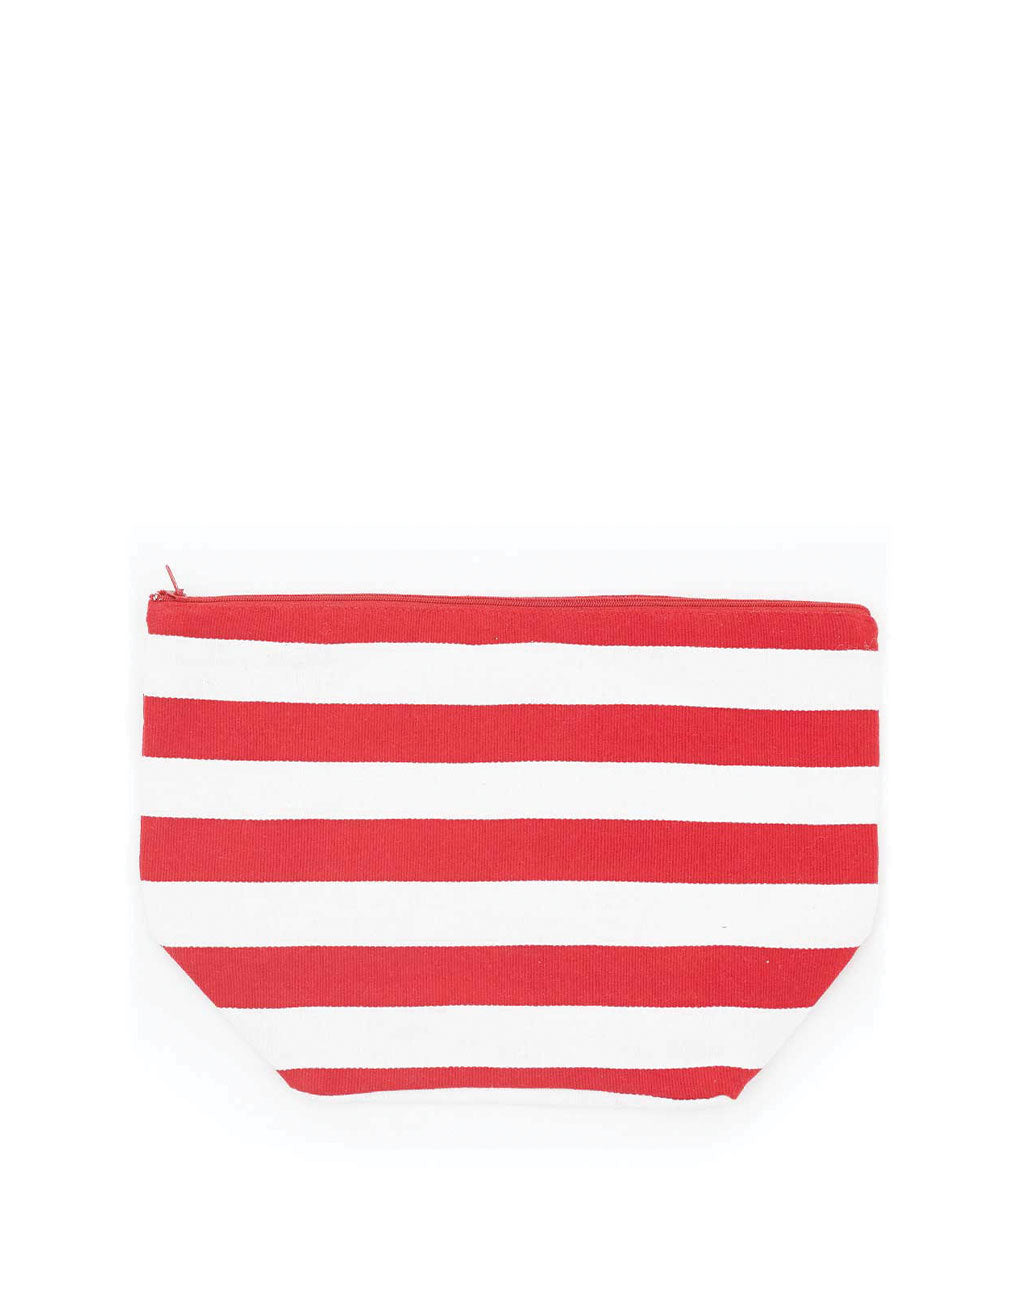 Candy Stripe Bag - Red